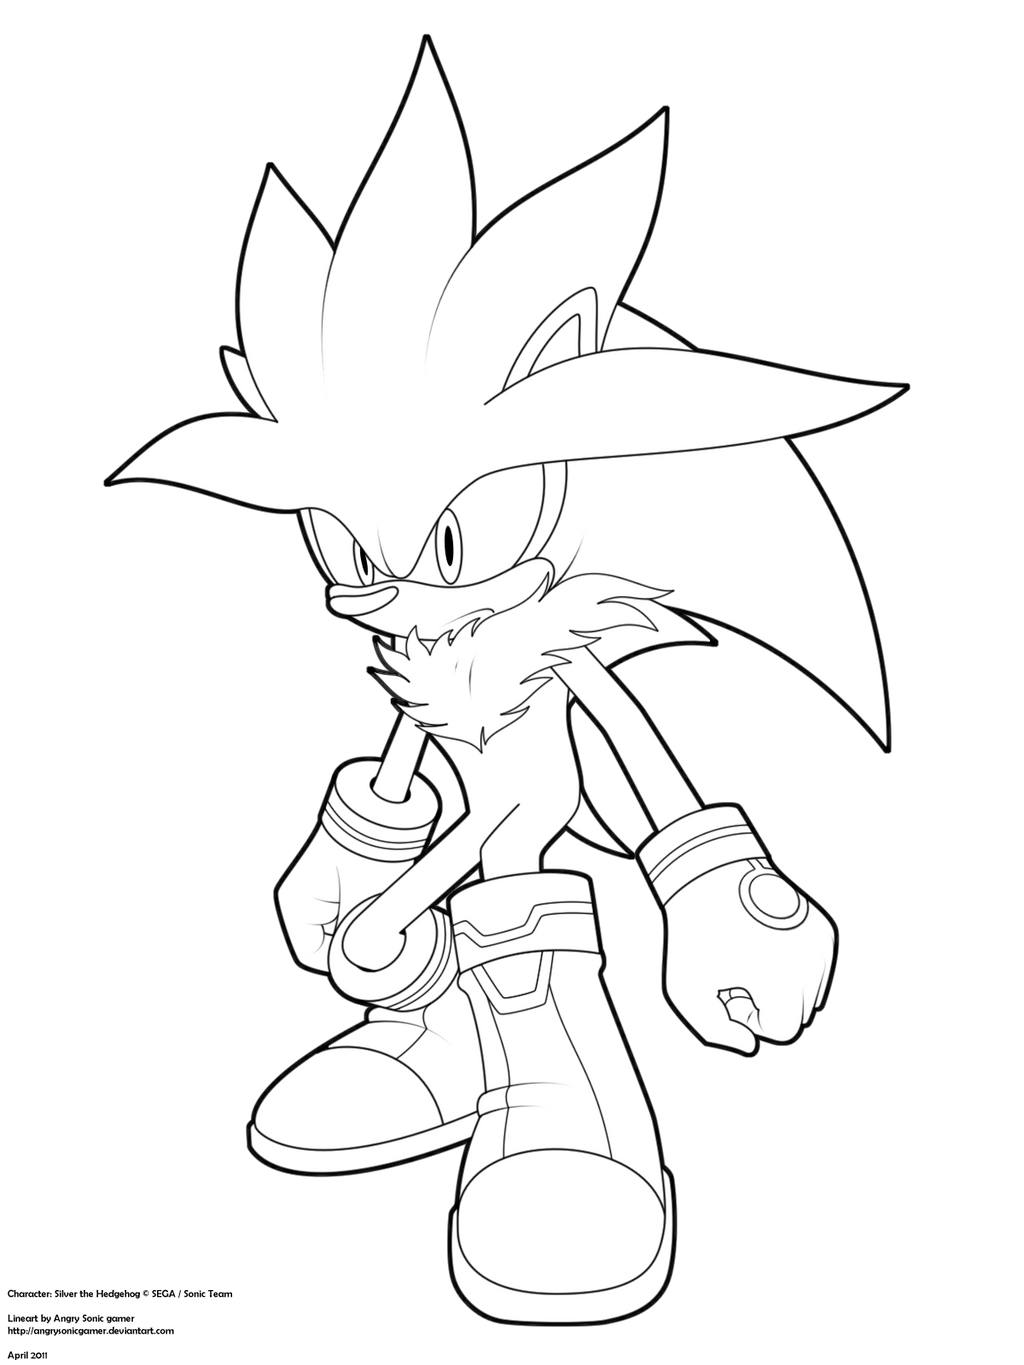 Lineart: Silver the hedgehog by Angrysonicgamer on DeviantArt